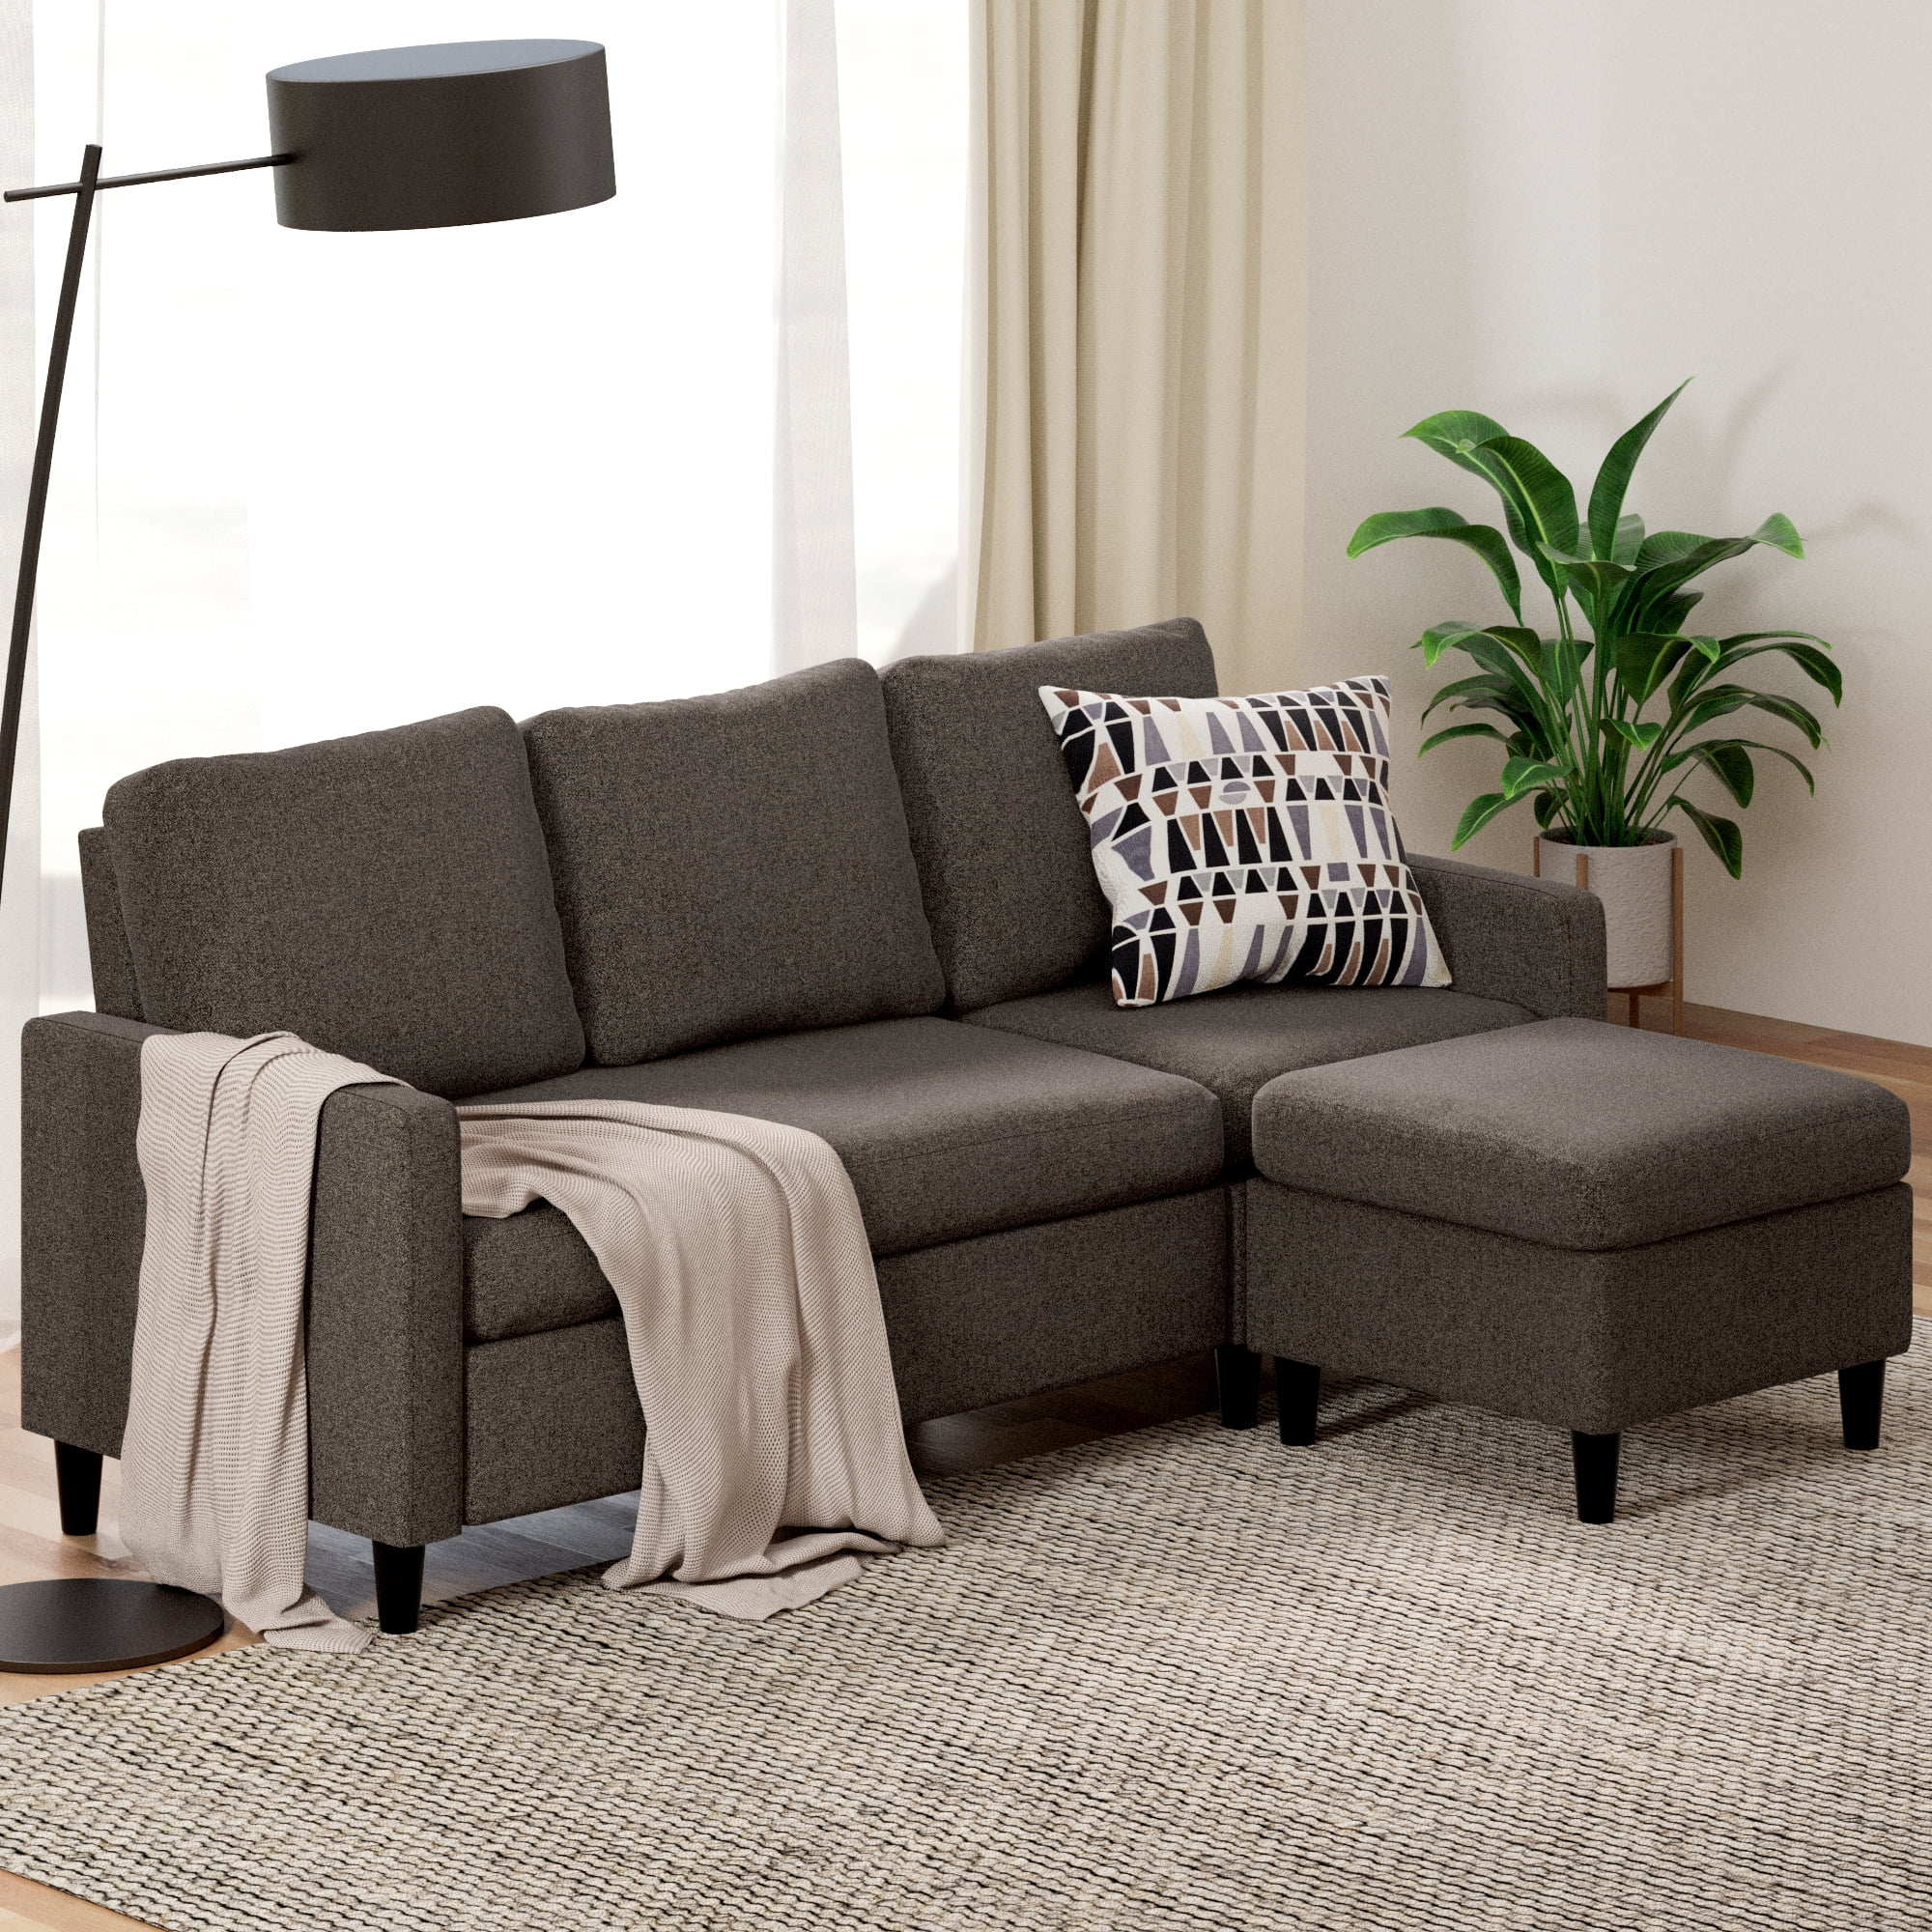 studieafgift fornuft forpligtelse Zinus Hudson Modern Convertible Sectional Sofa with Reversible Chaise, Dark  Grey - Walmart.com